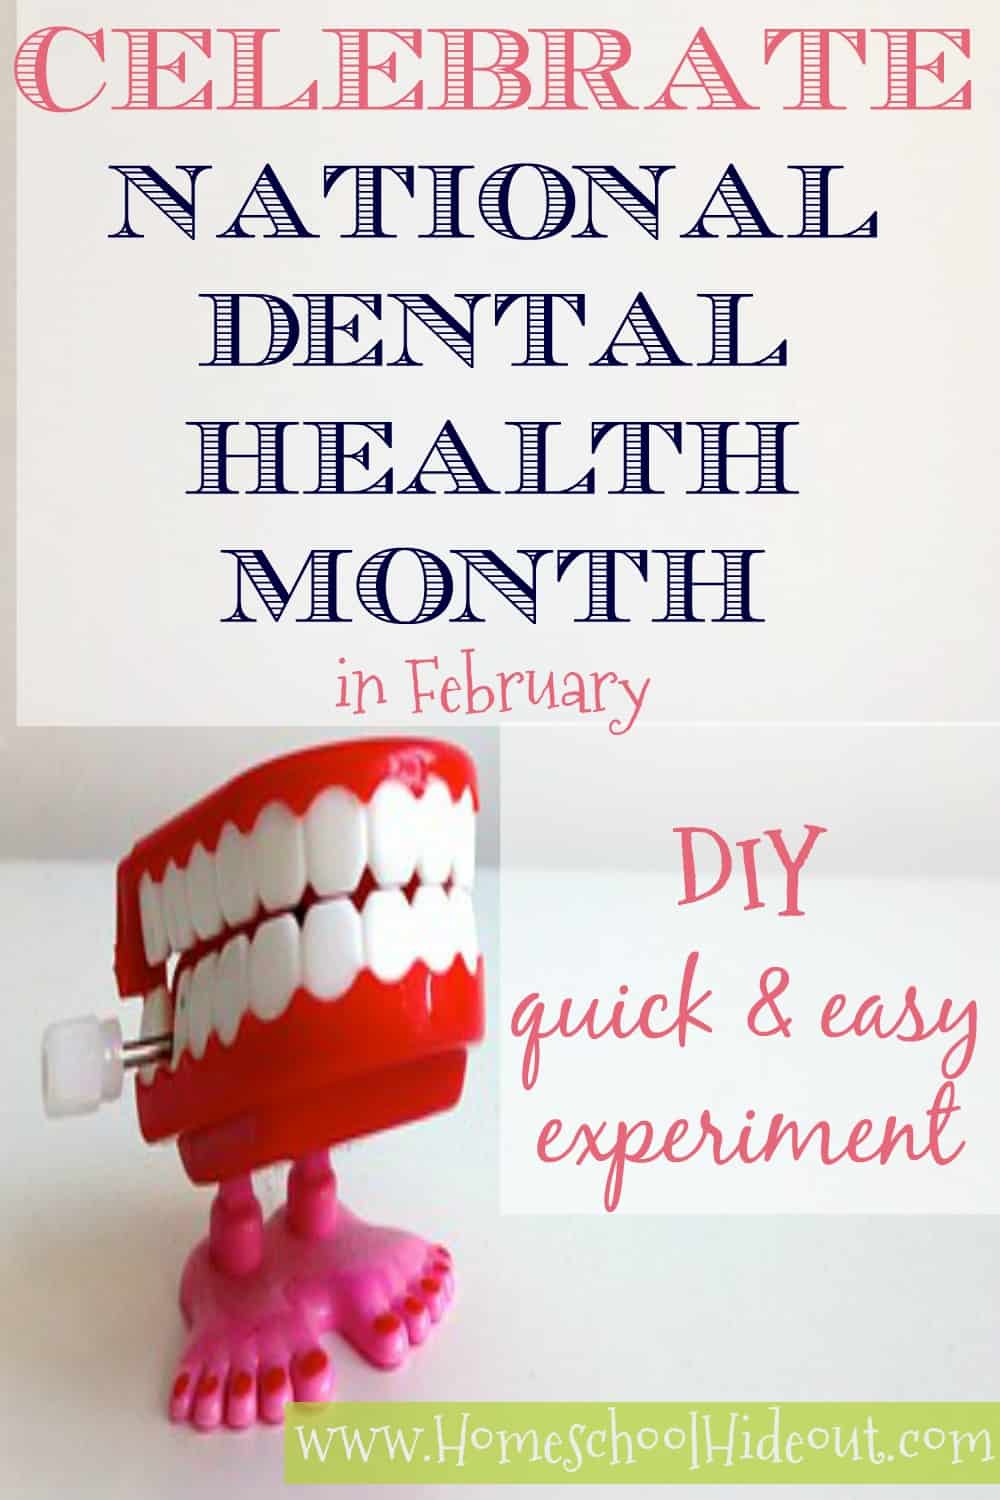 This was so simple and I had everything on hand! We loved celebrating National Dental Health Month with this hands-on learning activity!